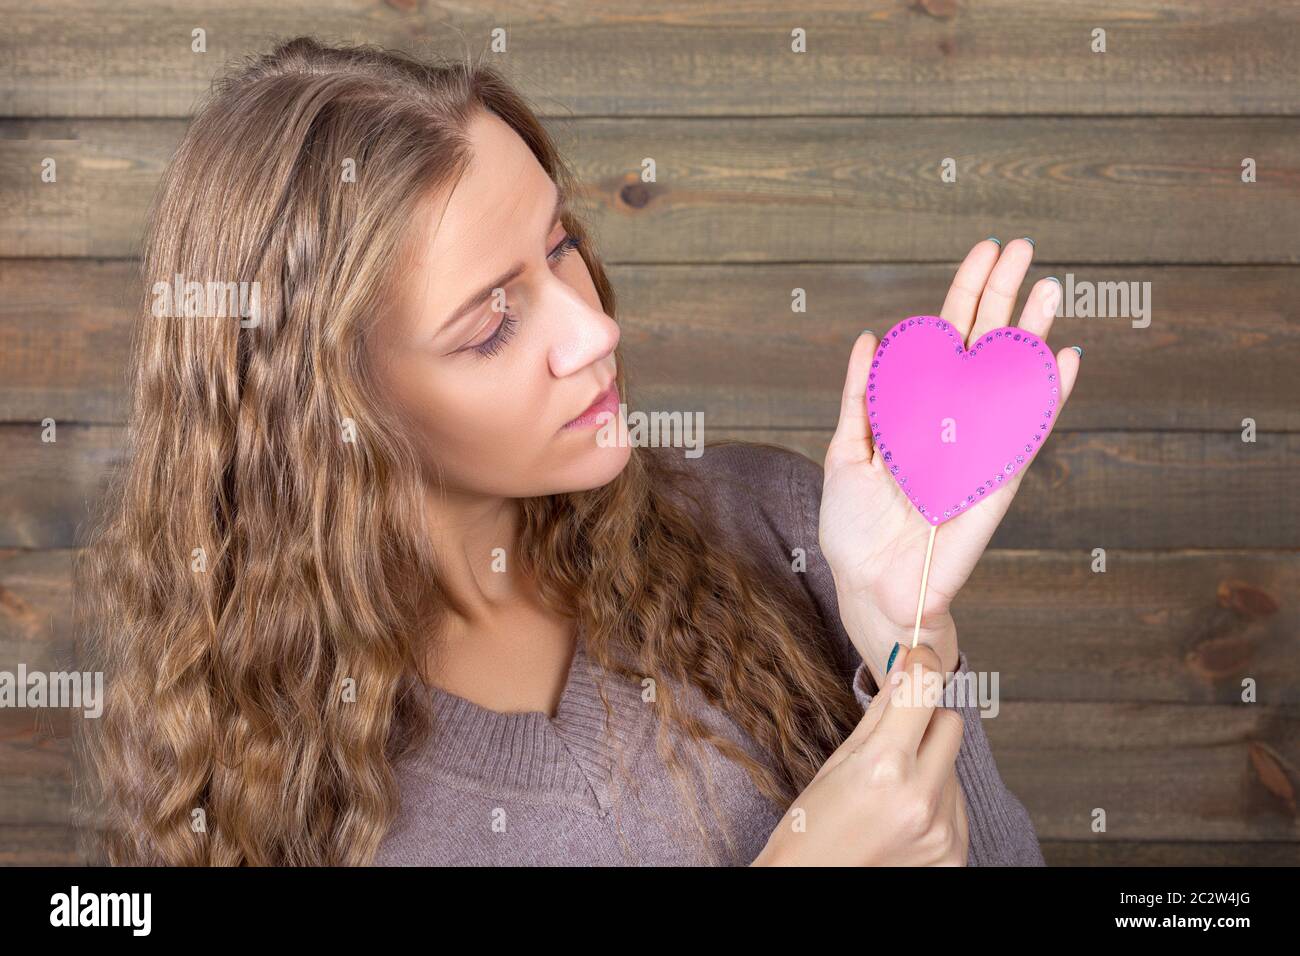 Young woman with funny pink heart in hand, wooden background. Fun photo props and accessories for shoots Stock Photo